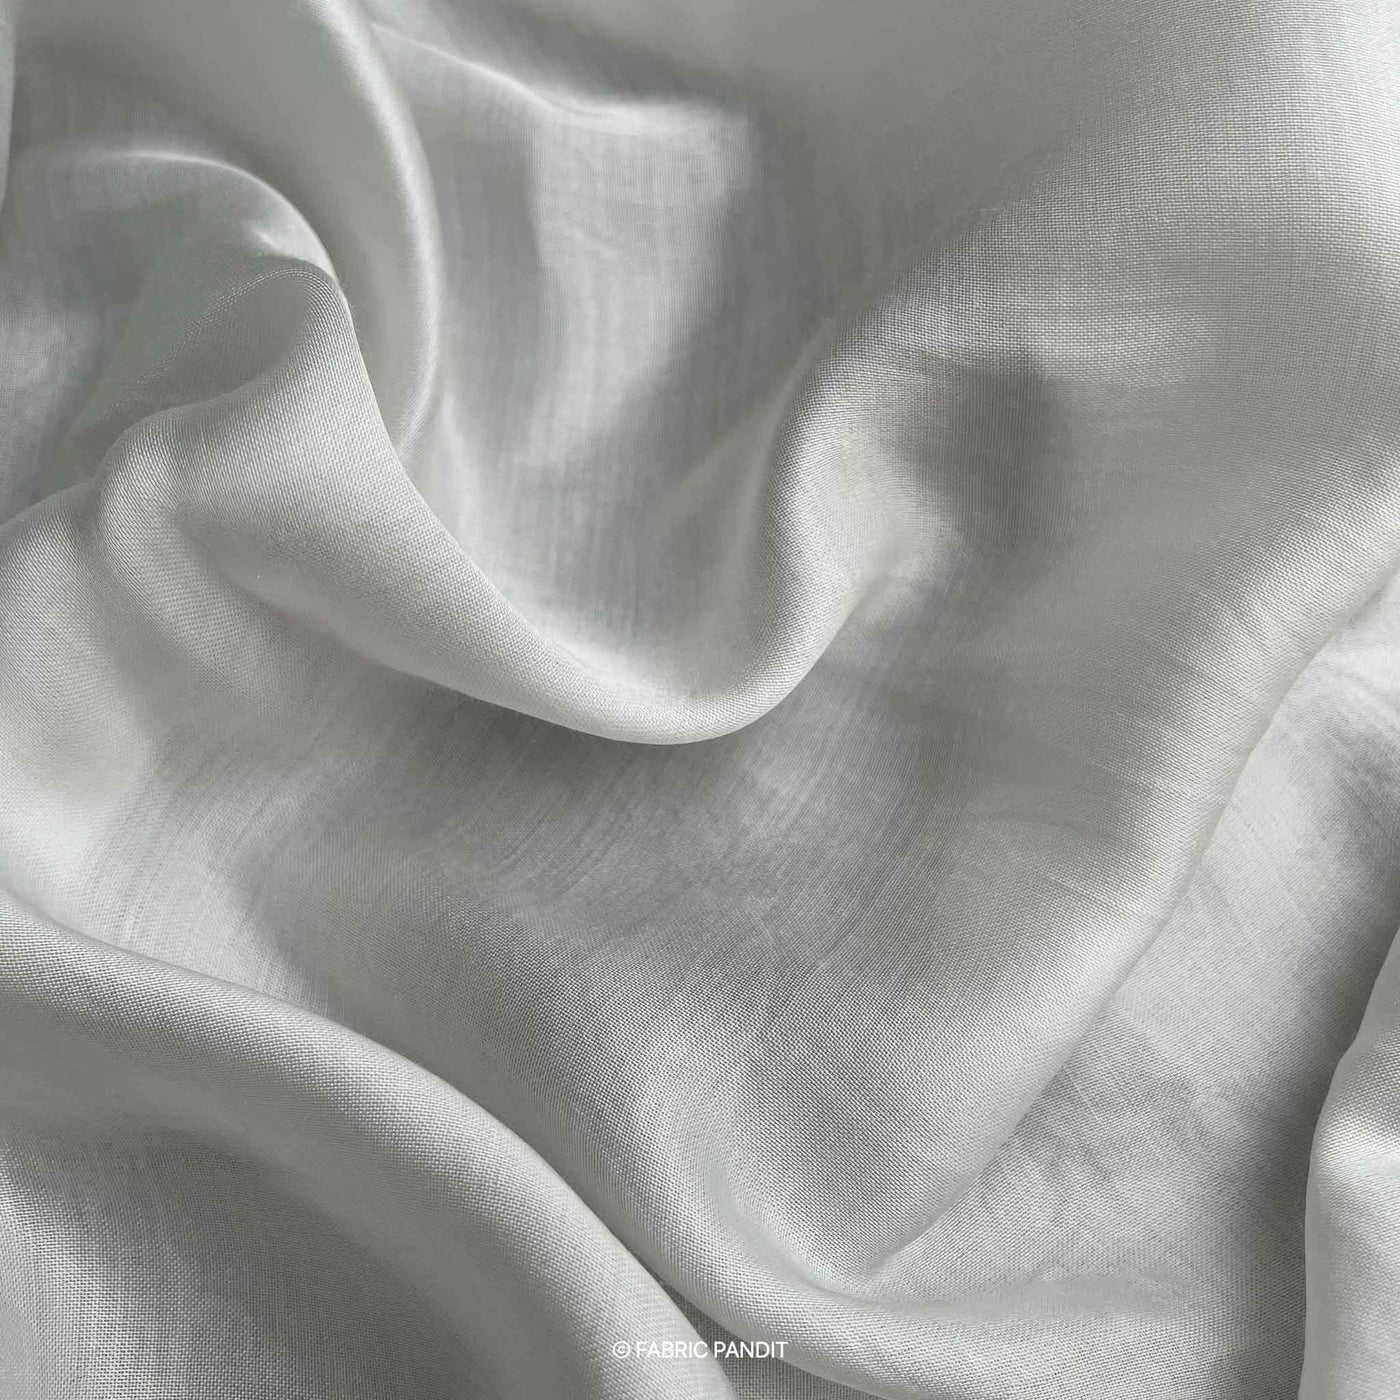 Dyeable Fabric Cut Piece (CUT PIECE) White Dyeable Pure Modal Satin Plain Fabric (Width 44 inches)